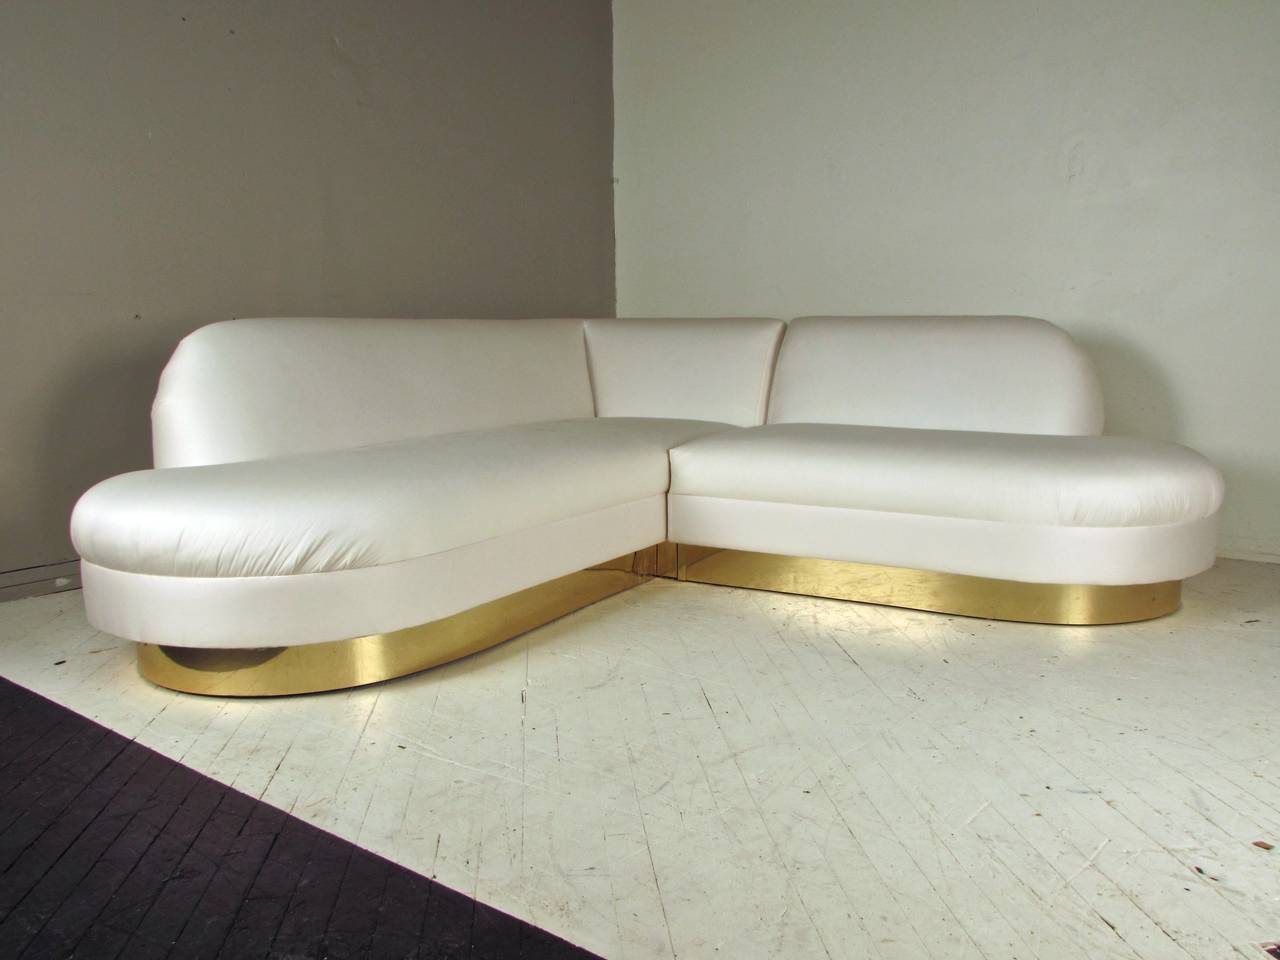 Late 20th Century Rare, Glamorous Adrian Pearsall Sofa with Brass Base for Comfort Designs, Inc